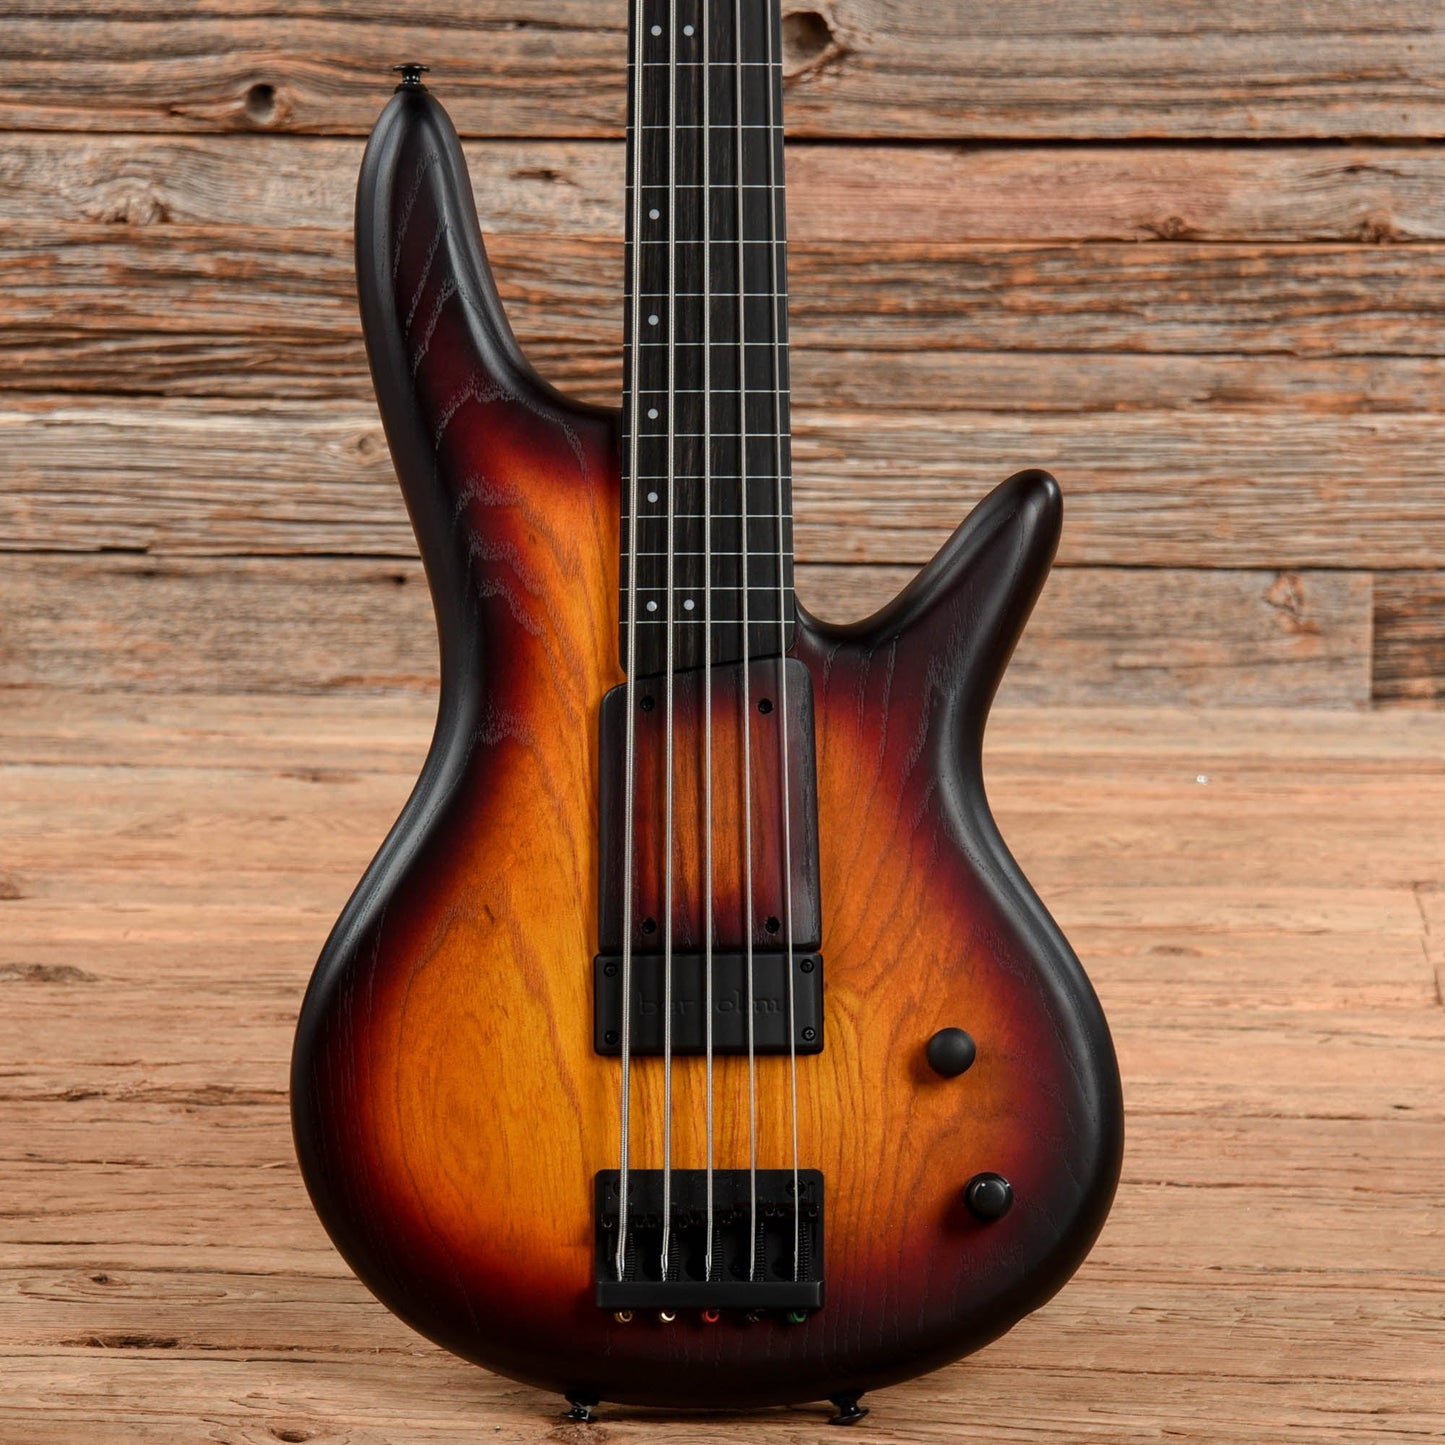 Ibanez GWB205 Gary Willis Signature Tequila Sunrise Flat 2022 Bass Guitars / 5-String or More